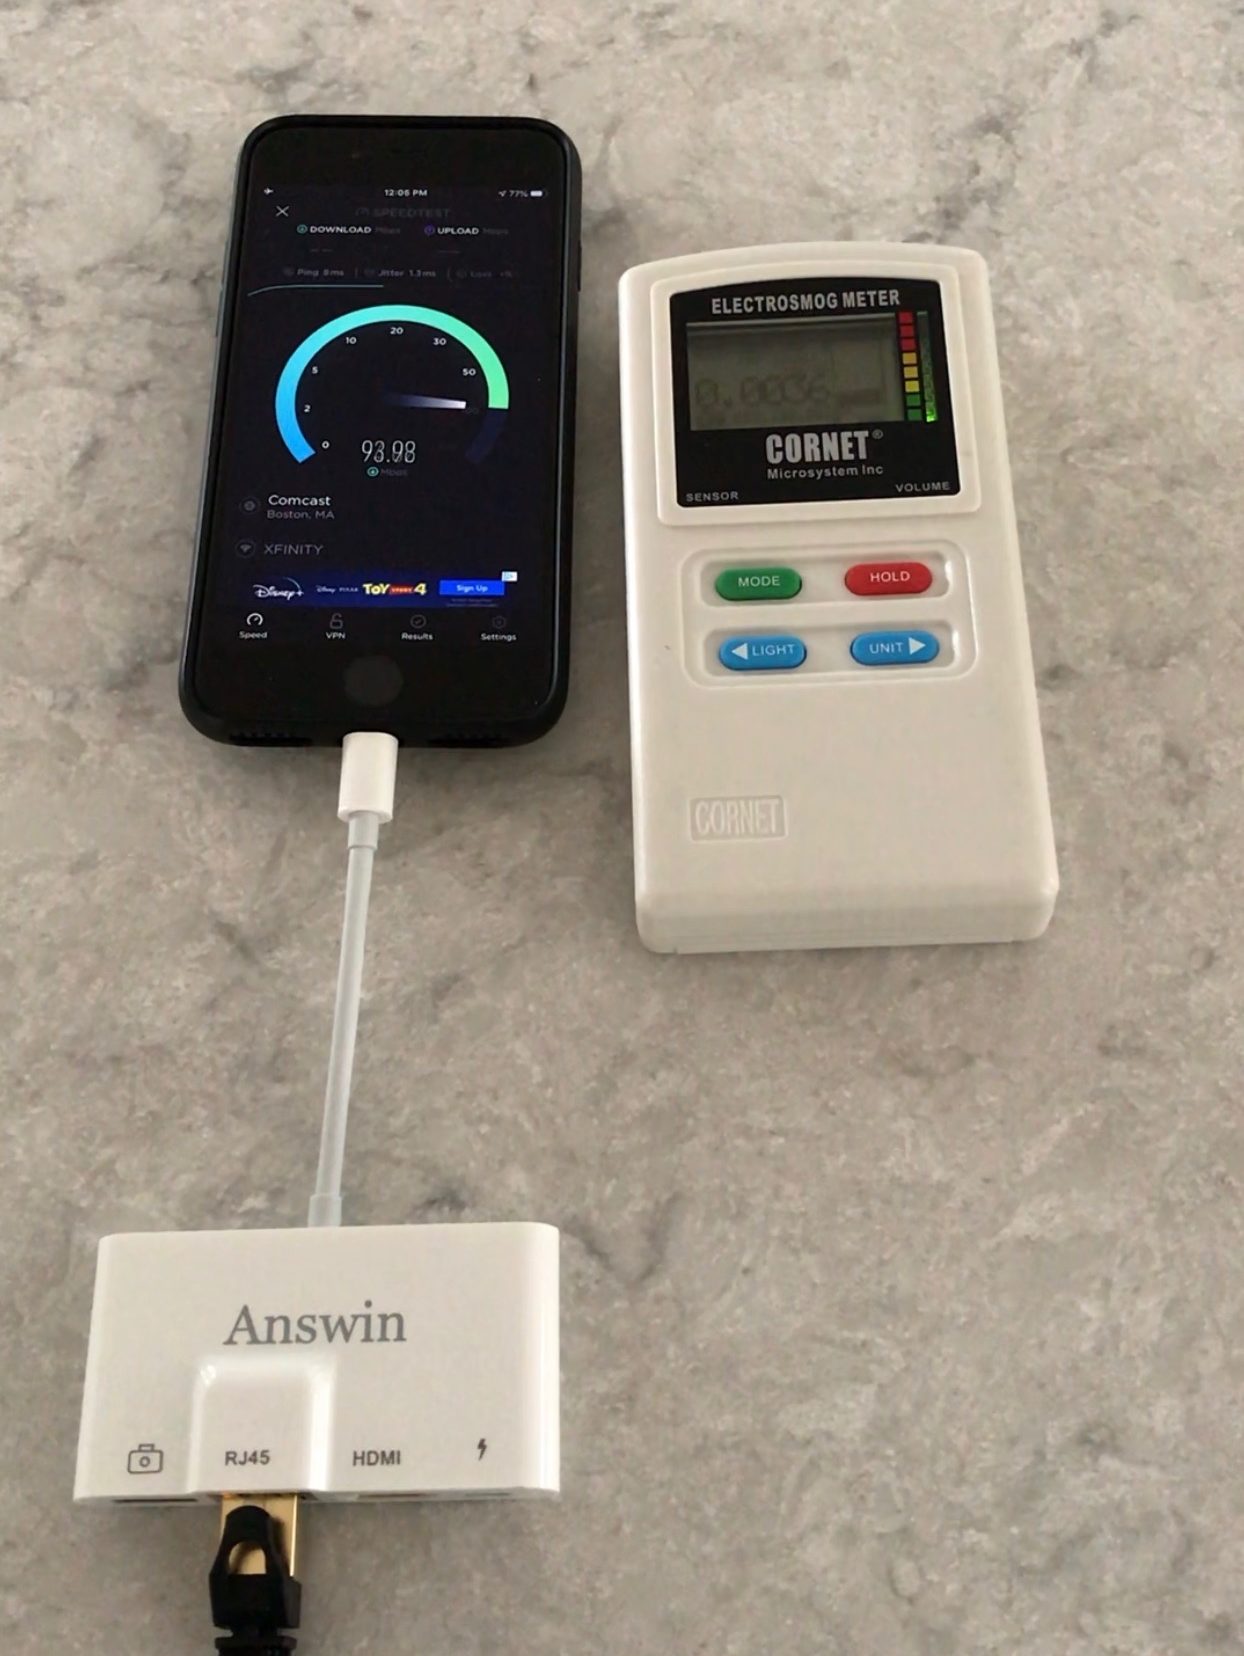 Wire iPhone via Ethernet - Speeds of 93.93 and RF measurement of 0.0036